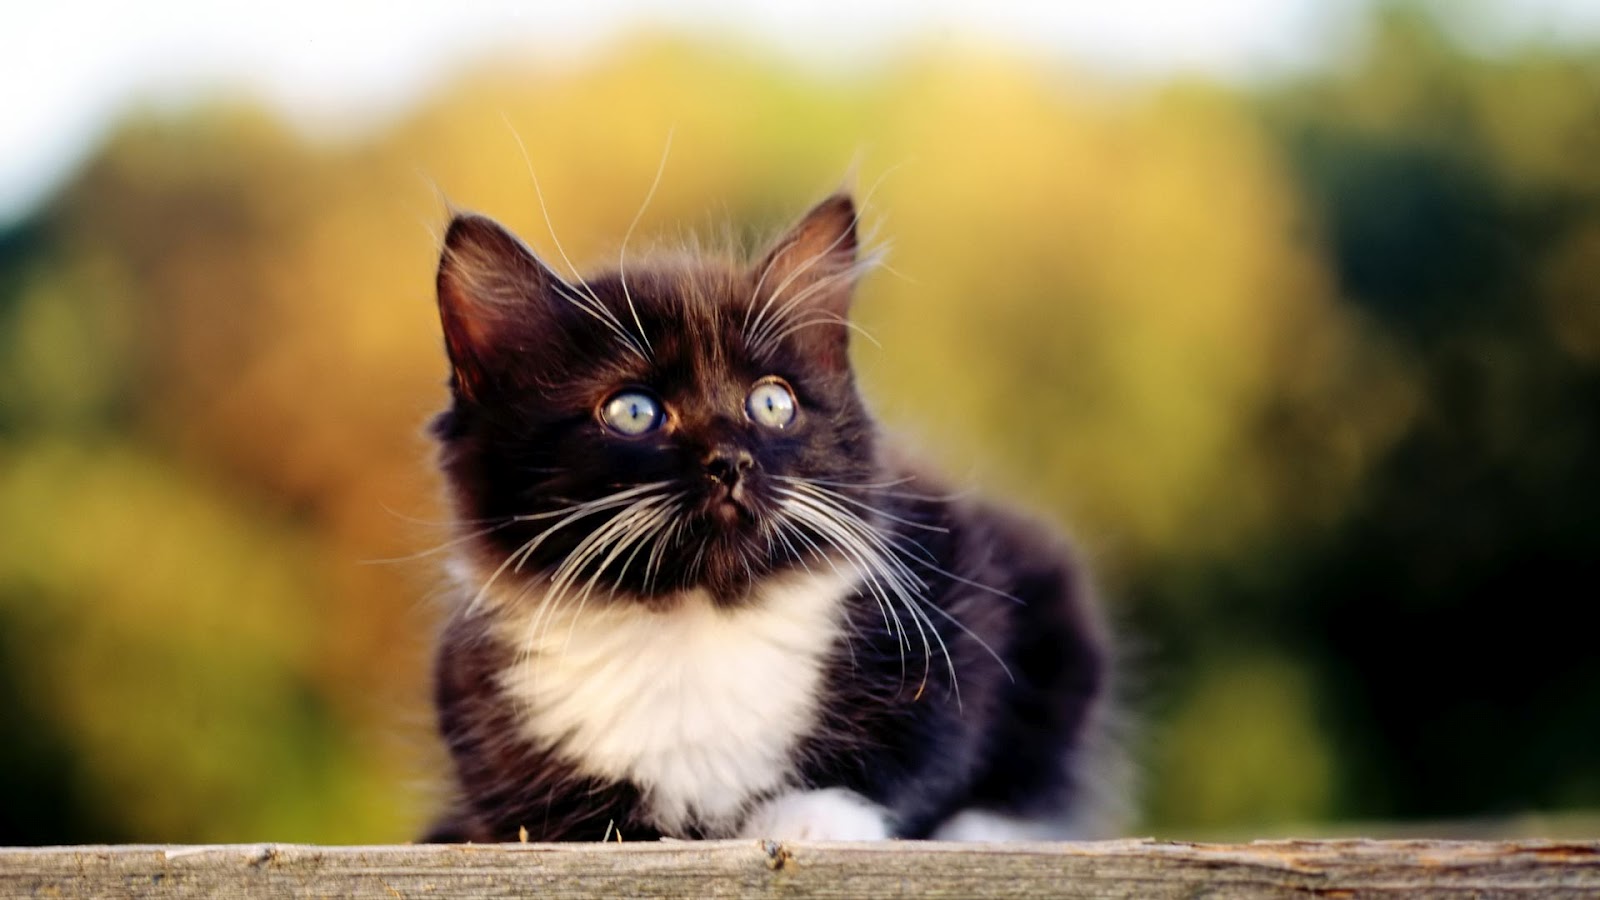 World's All Amazing Things, Pictures,Images And Wallpapers: Cute Kitten